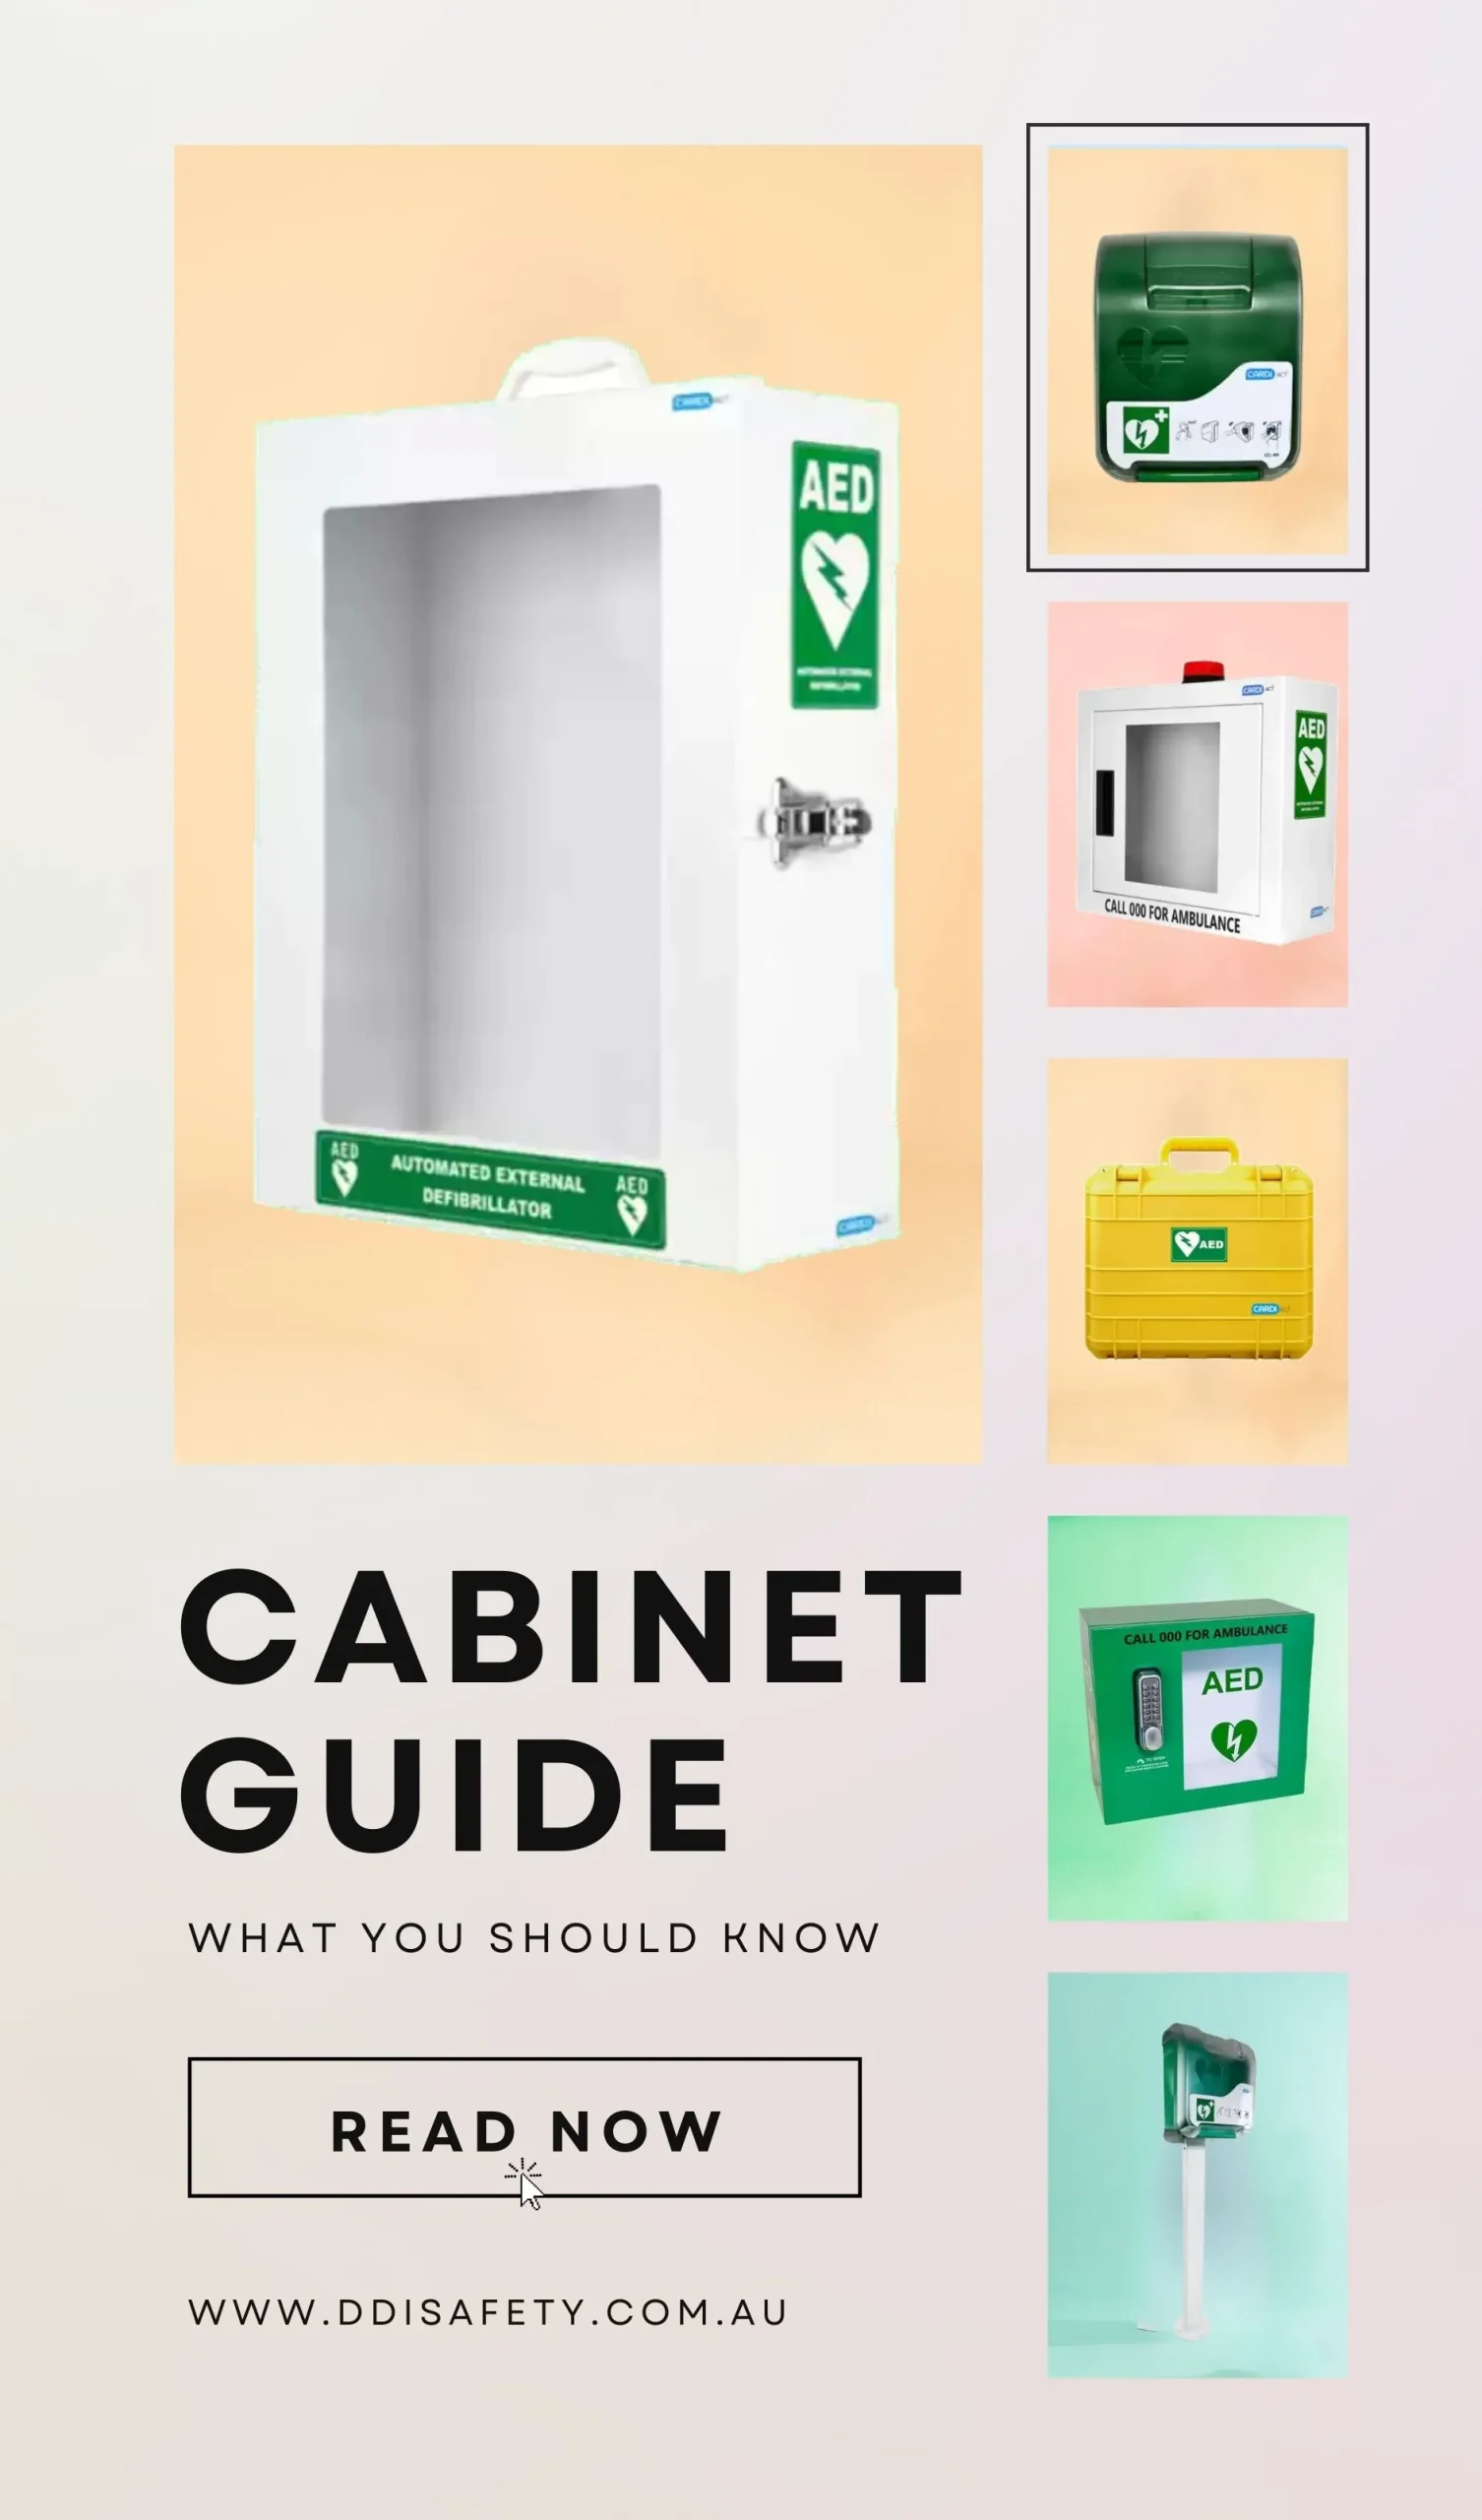 "A promotional poster for a 'Cabinet Guide' featuring various AED (Automated External Defibrillator) cabinets in different colors and designs. The main image shows a white AED cabinet with a green AED sign. Smaller images on the right showcase a green cabinet, a white cabinet with a red light, a yellow carrying case, and a green wall-mounted cabinet. Text on the poster reads: 'CABINET GUIDE - What You Should Know' and includes a call-to-action button labeled 'READ NOW' with the website address 'www.ddisafety.com.au' at the bottom."  